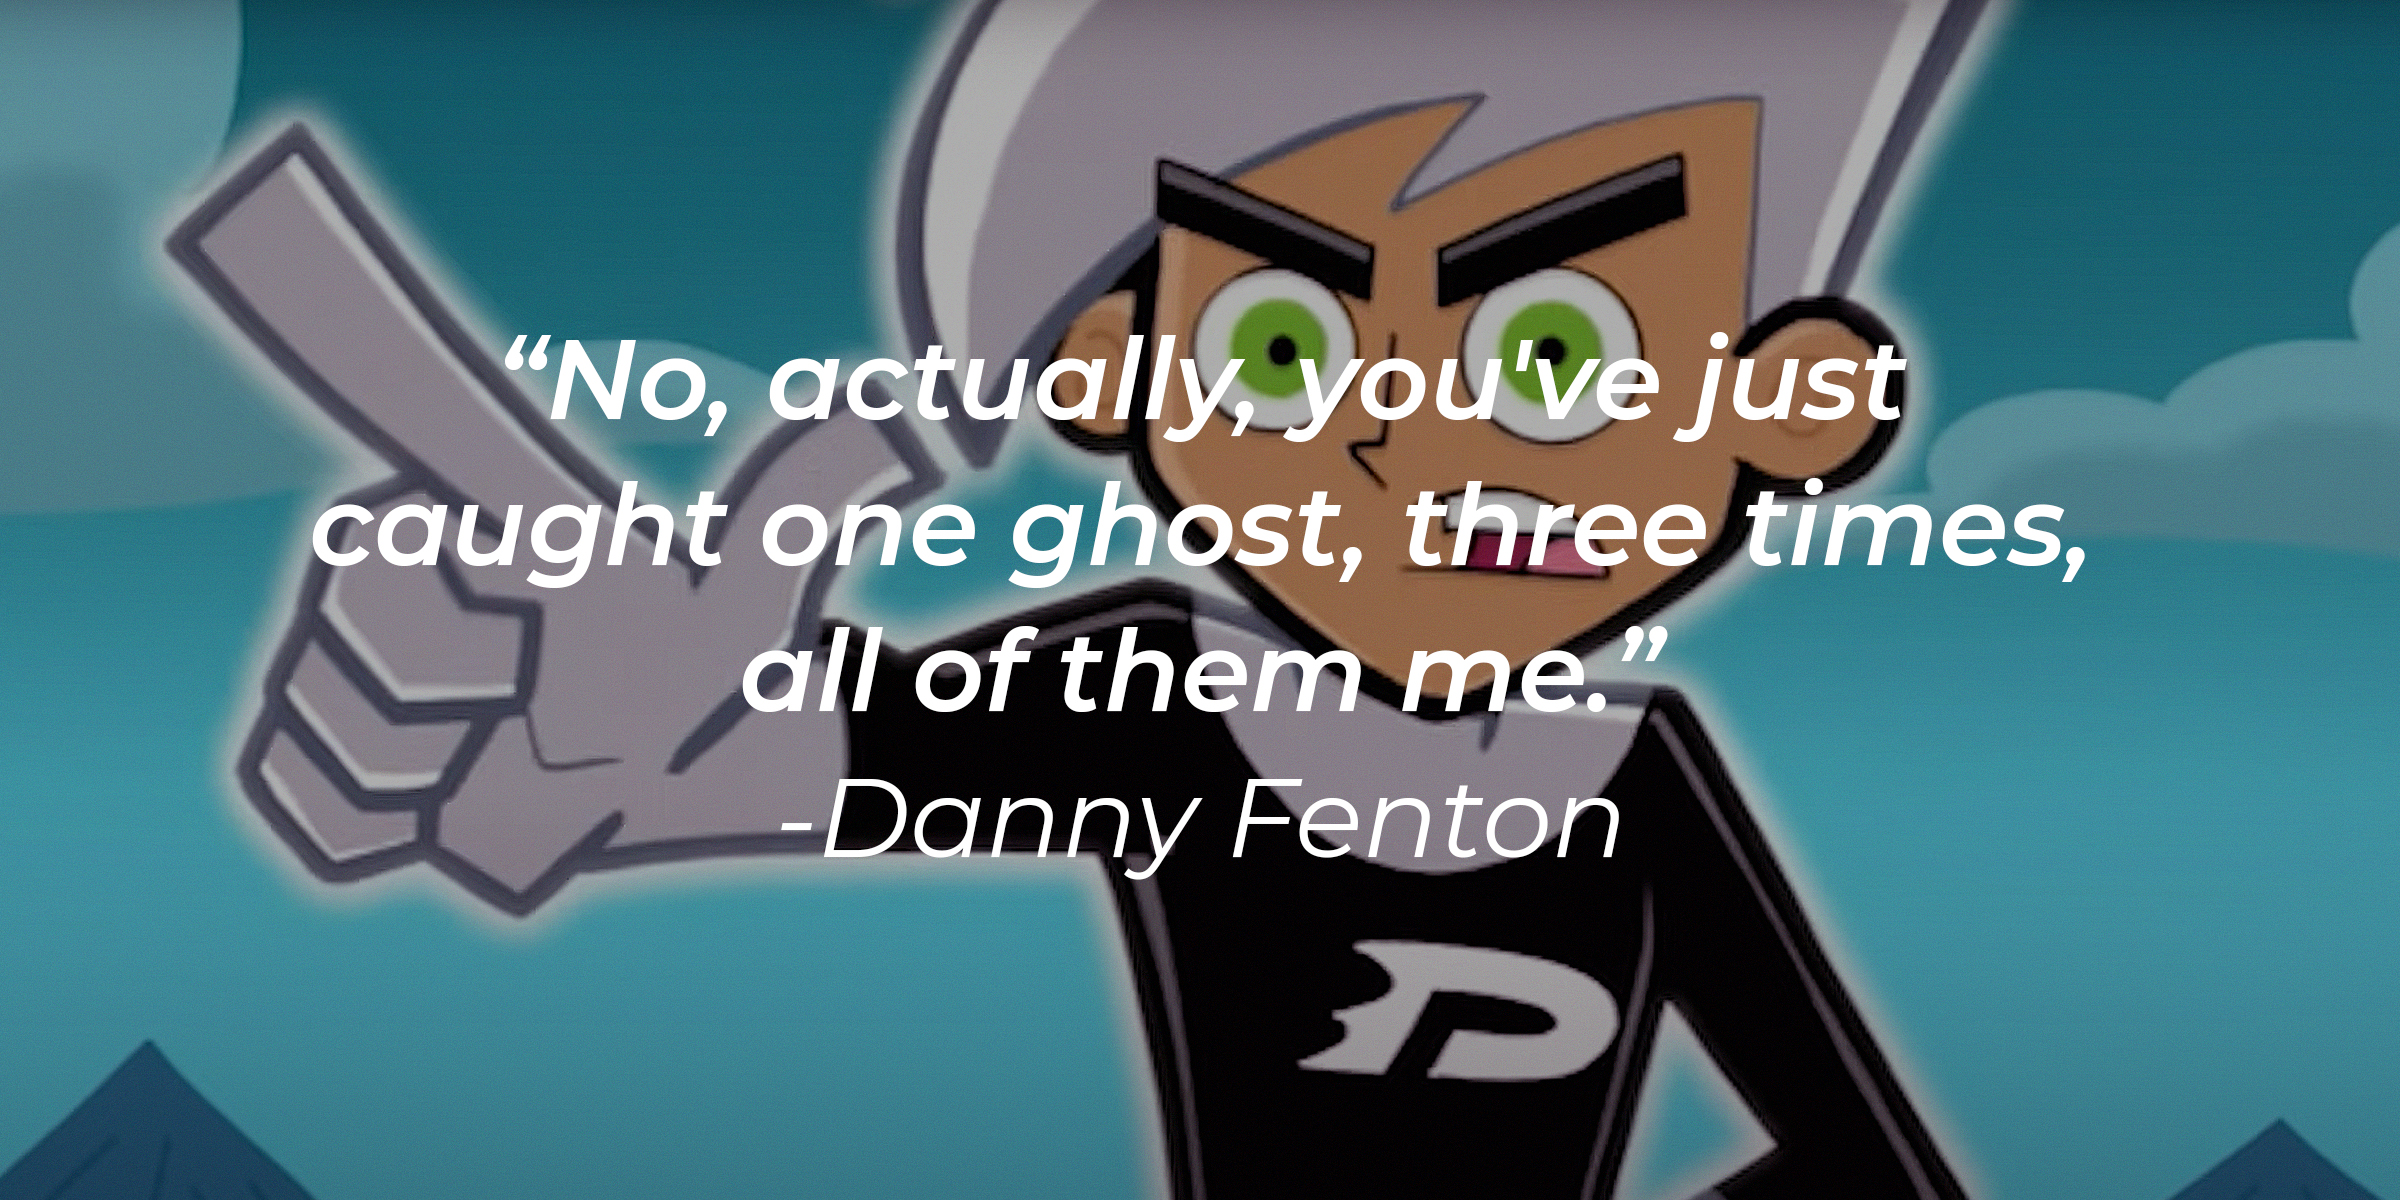 An image of Danny Phanto wtih Danny Fenton’s quote: “No, actually, you've just caught one ghost, three times, all of them me." | Source: youtube.com/nickrewind